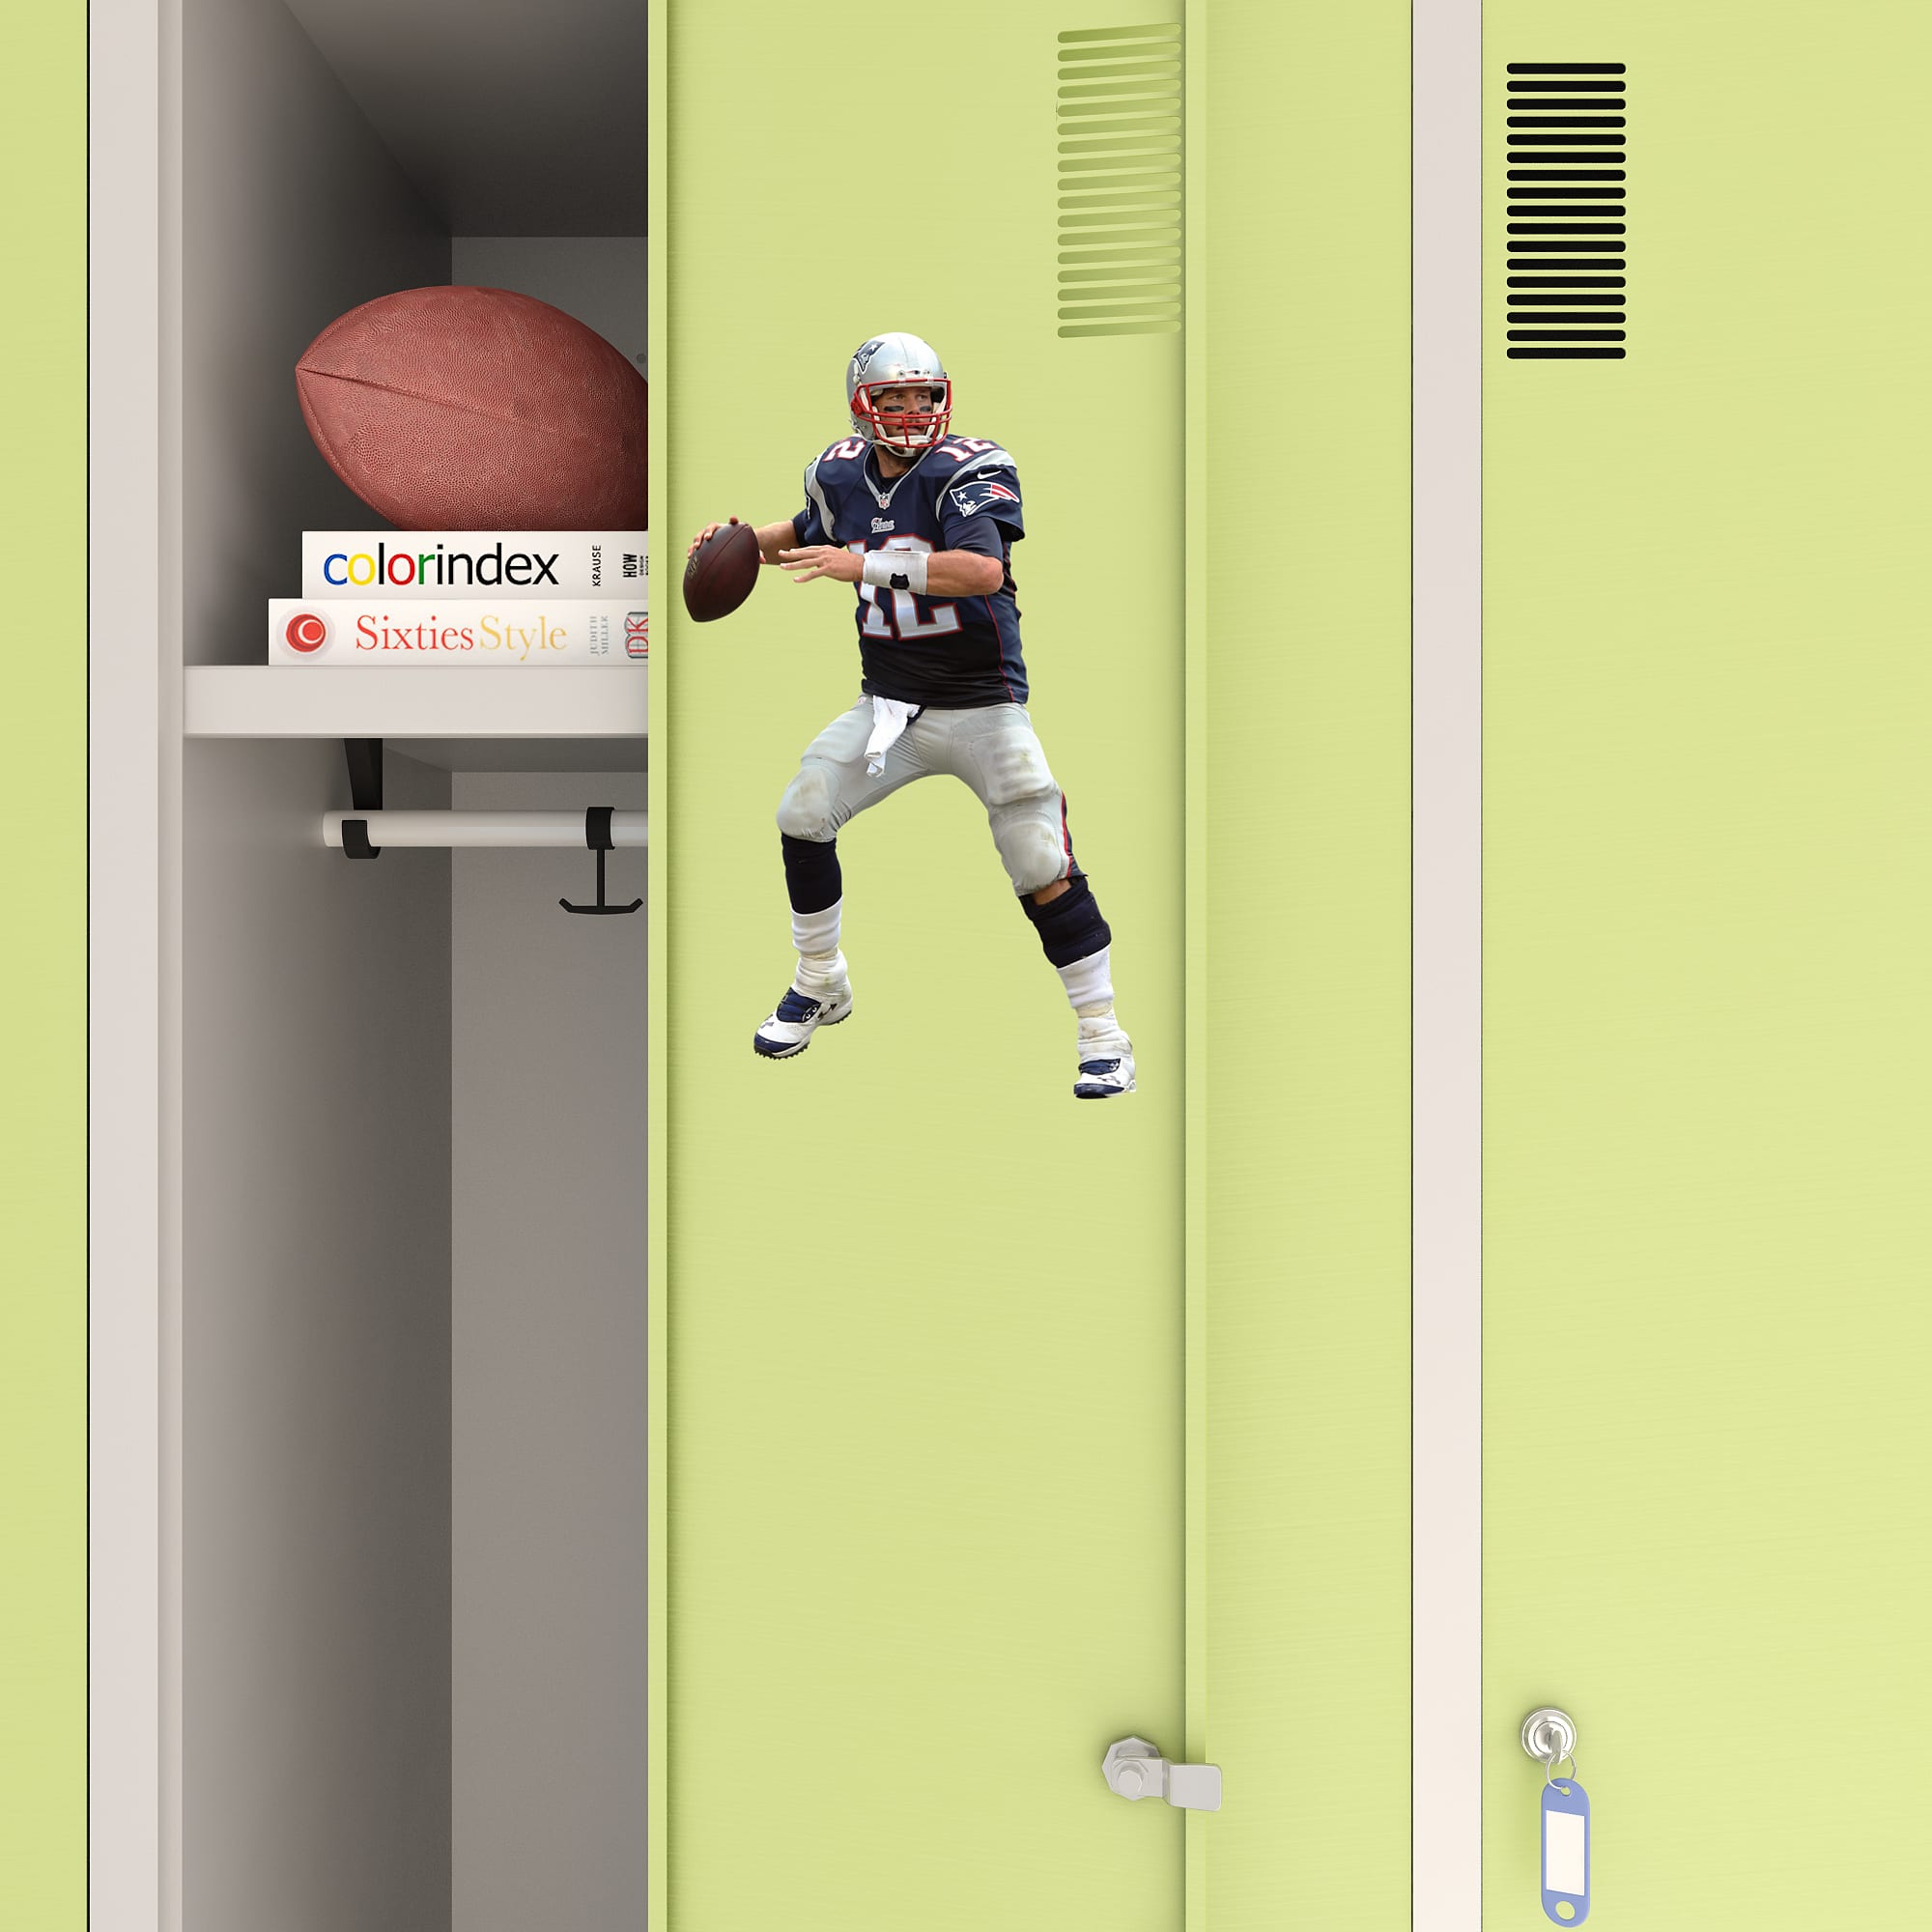 Tom Brady for New England Patriots - Officially Licensed NFL Removable Wall Decal 6.5"W x 16.5"H by Fathead | Vinyl